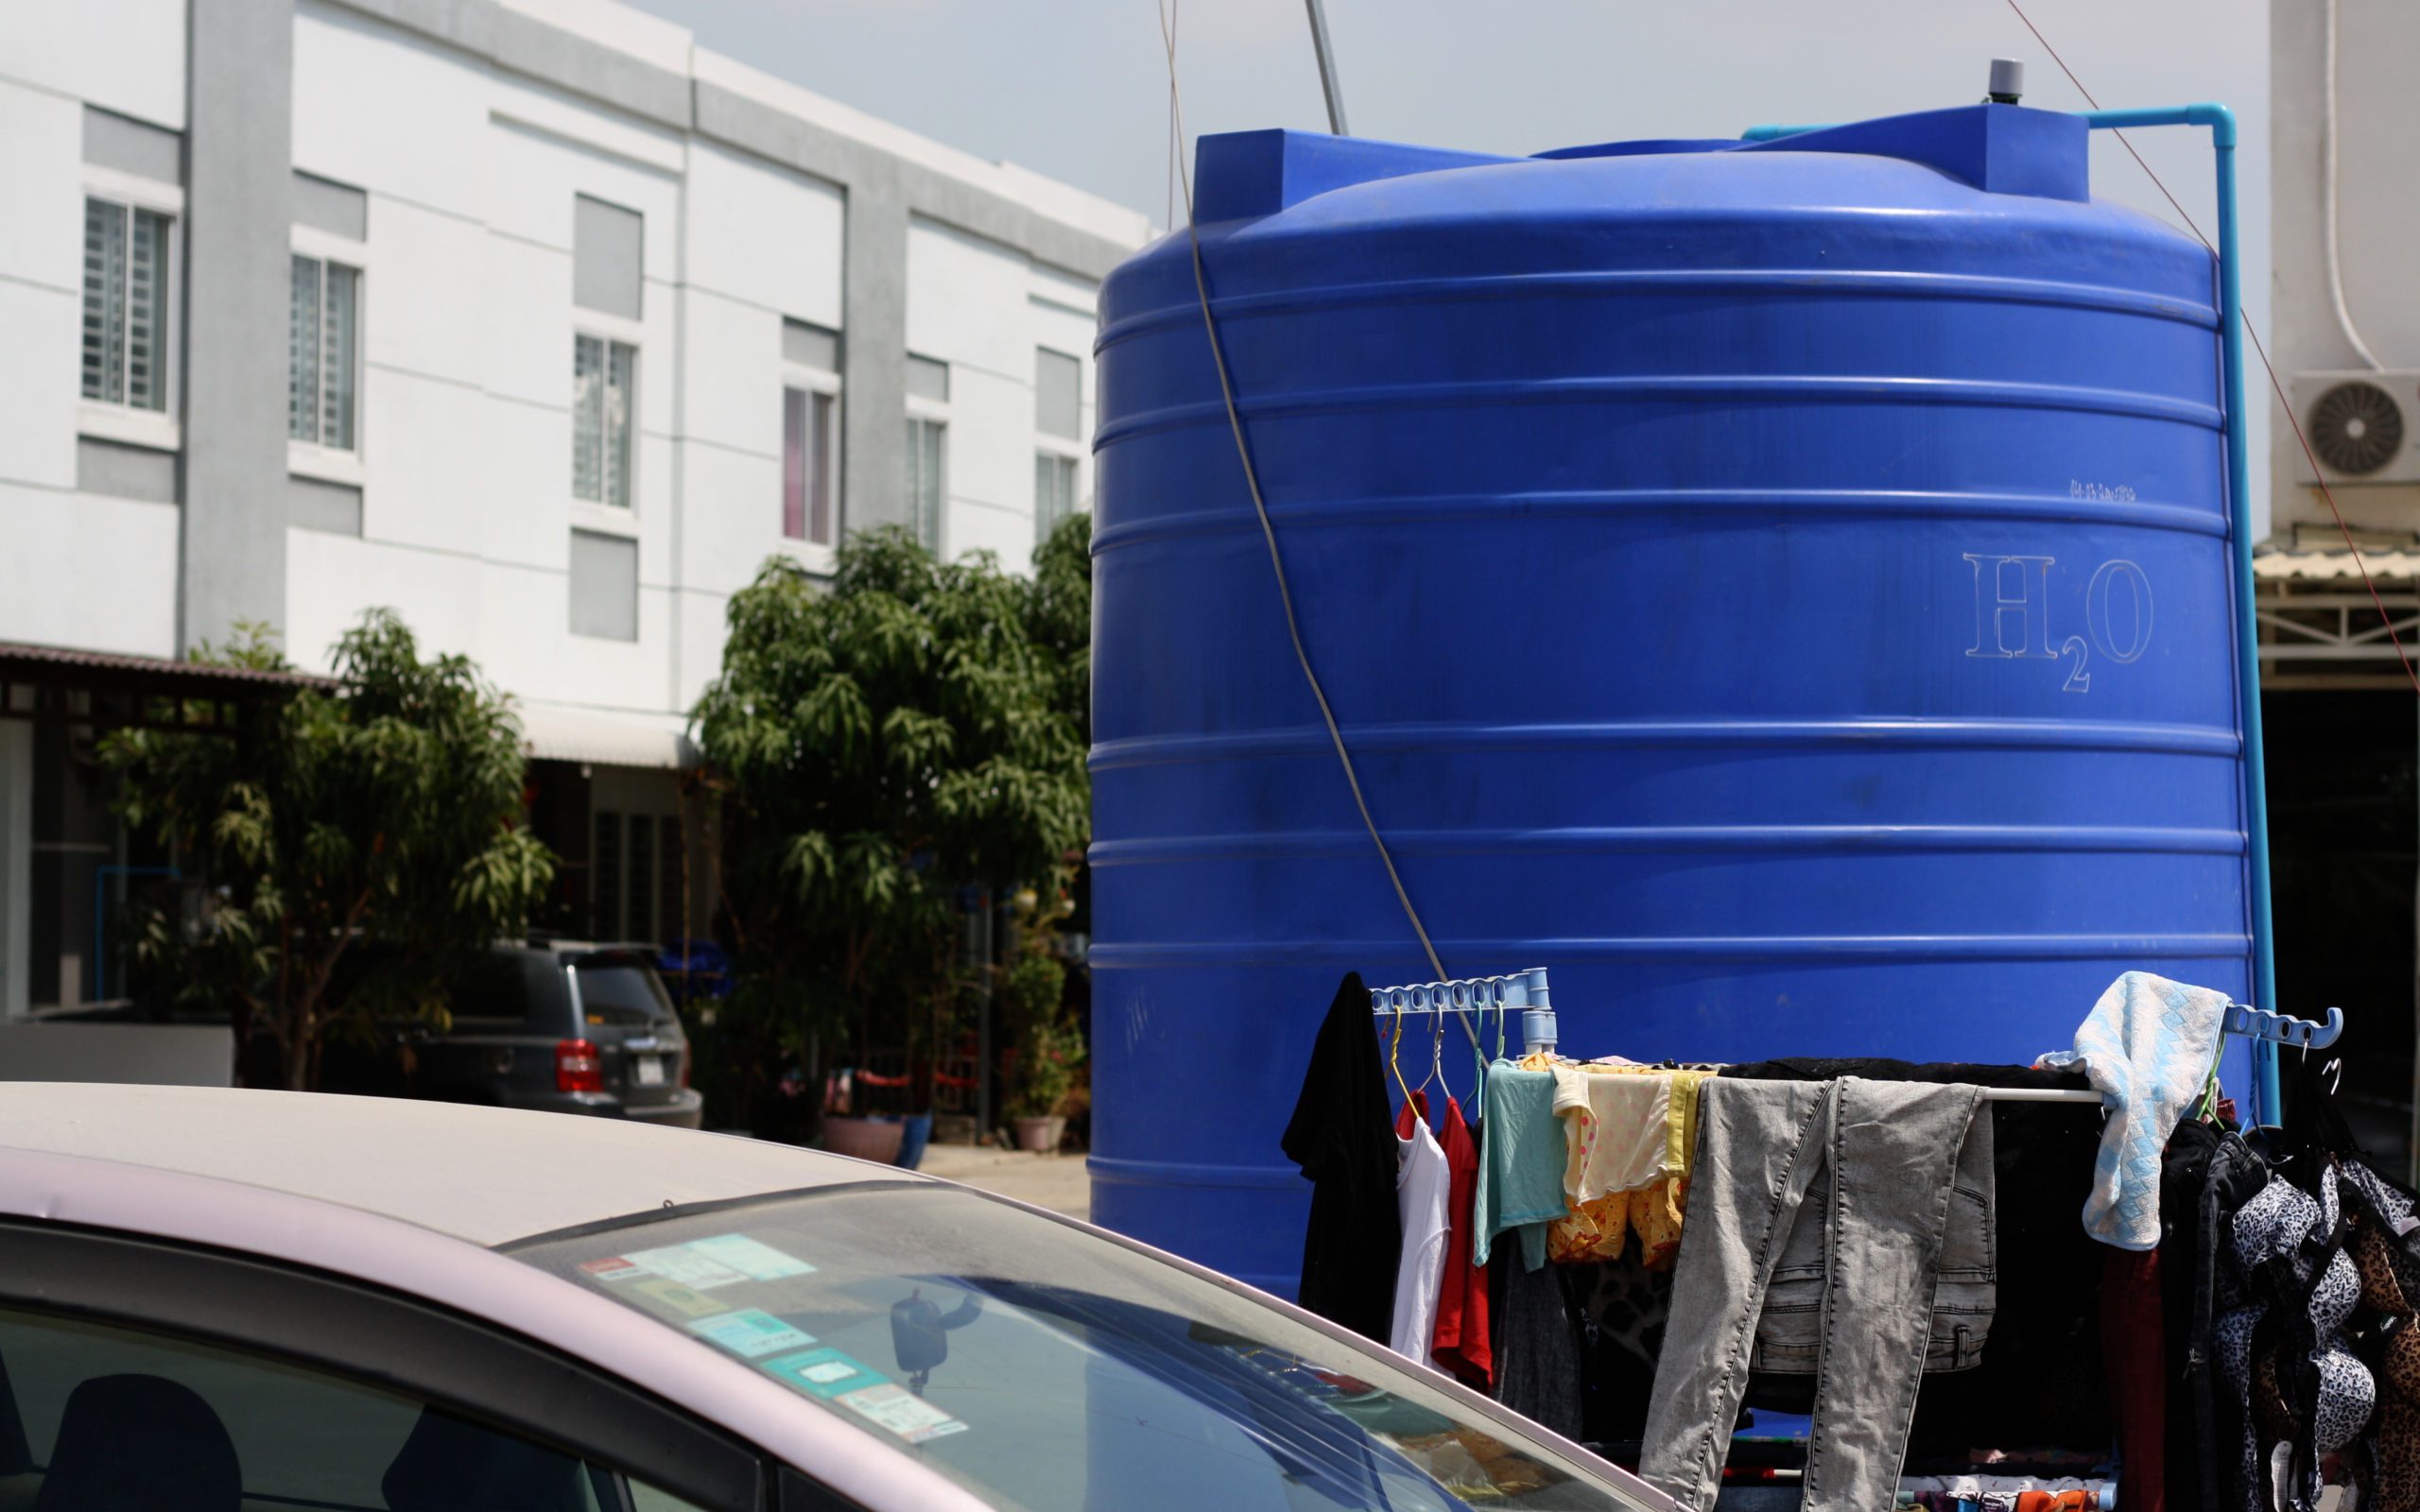 A water tank in Phnom Penh’s Borey Piphup Thmey 2, on February 3, 2022. (Michael Dickison/VOD)